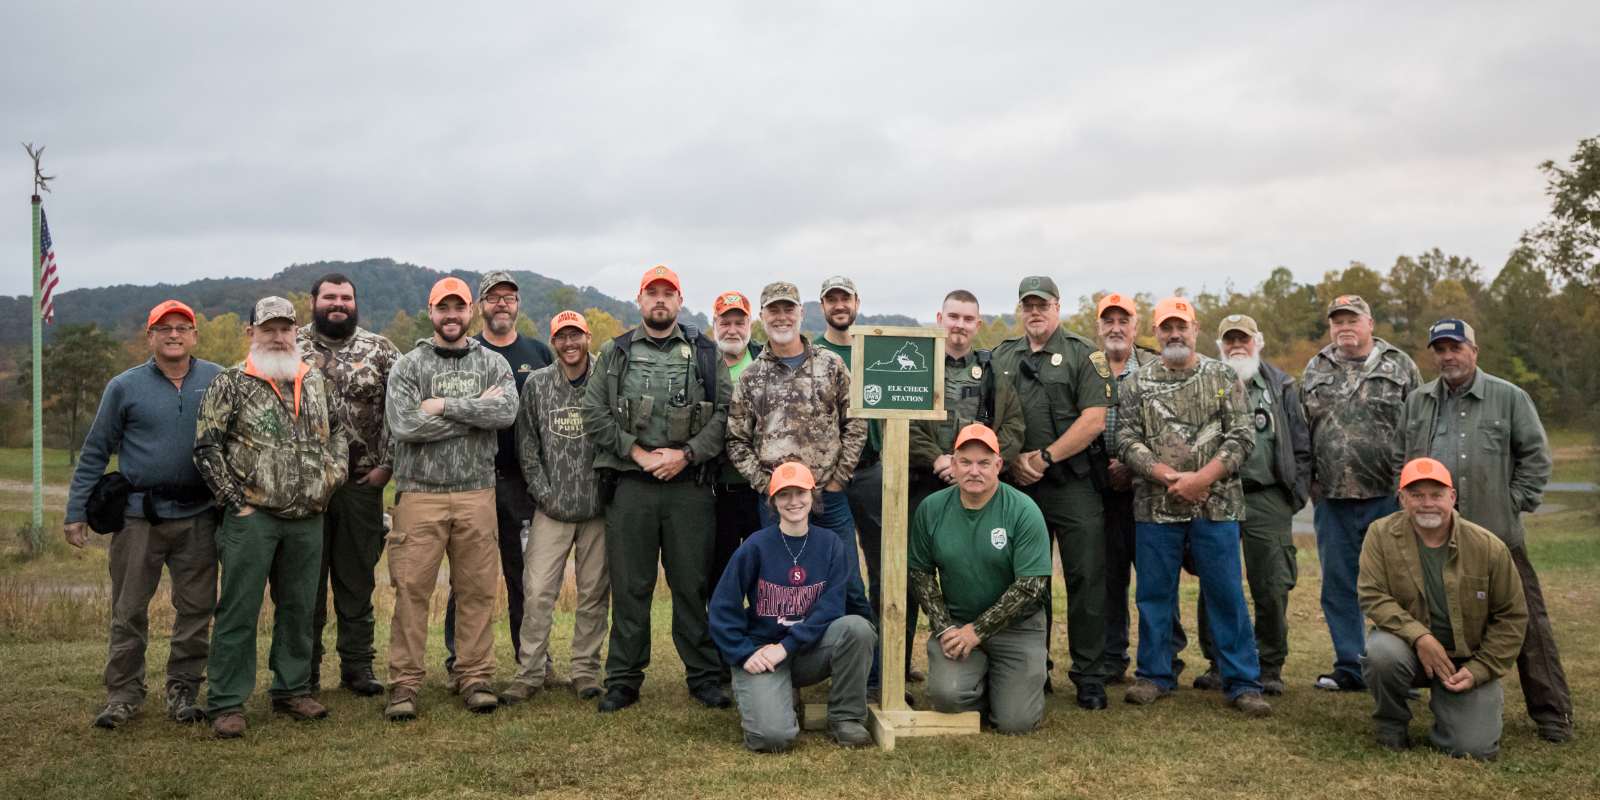 A group of 20 people posing as a group with a sign that reads "Elk Weigh Station."